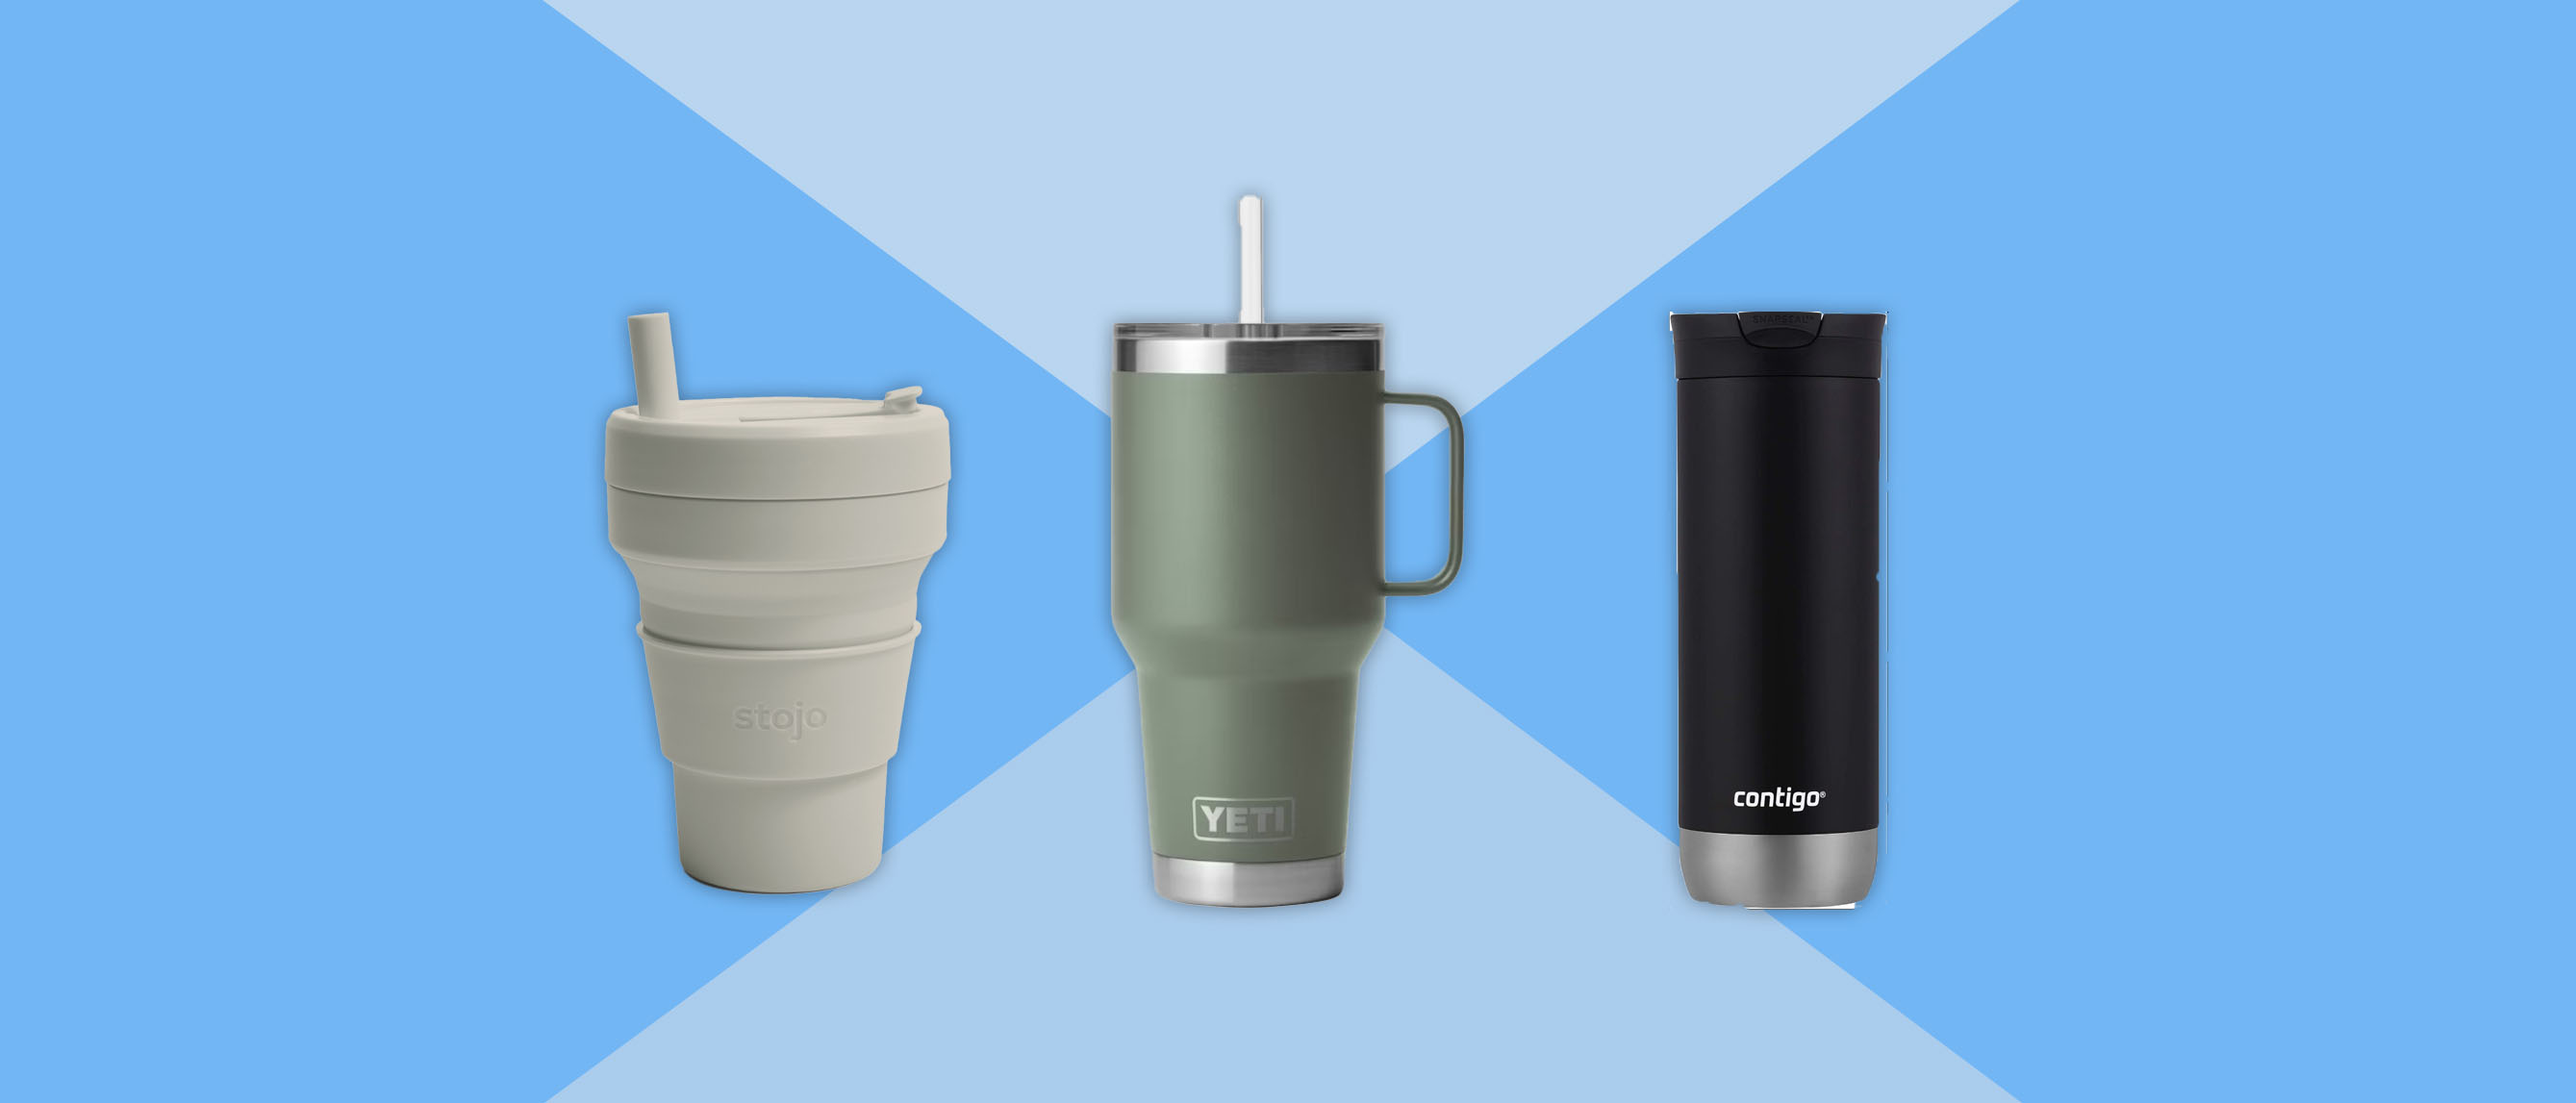 Collage of 3 travel mugs against a blue background